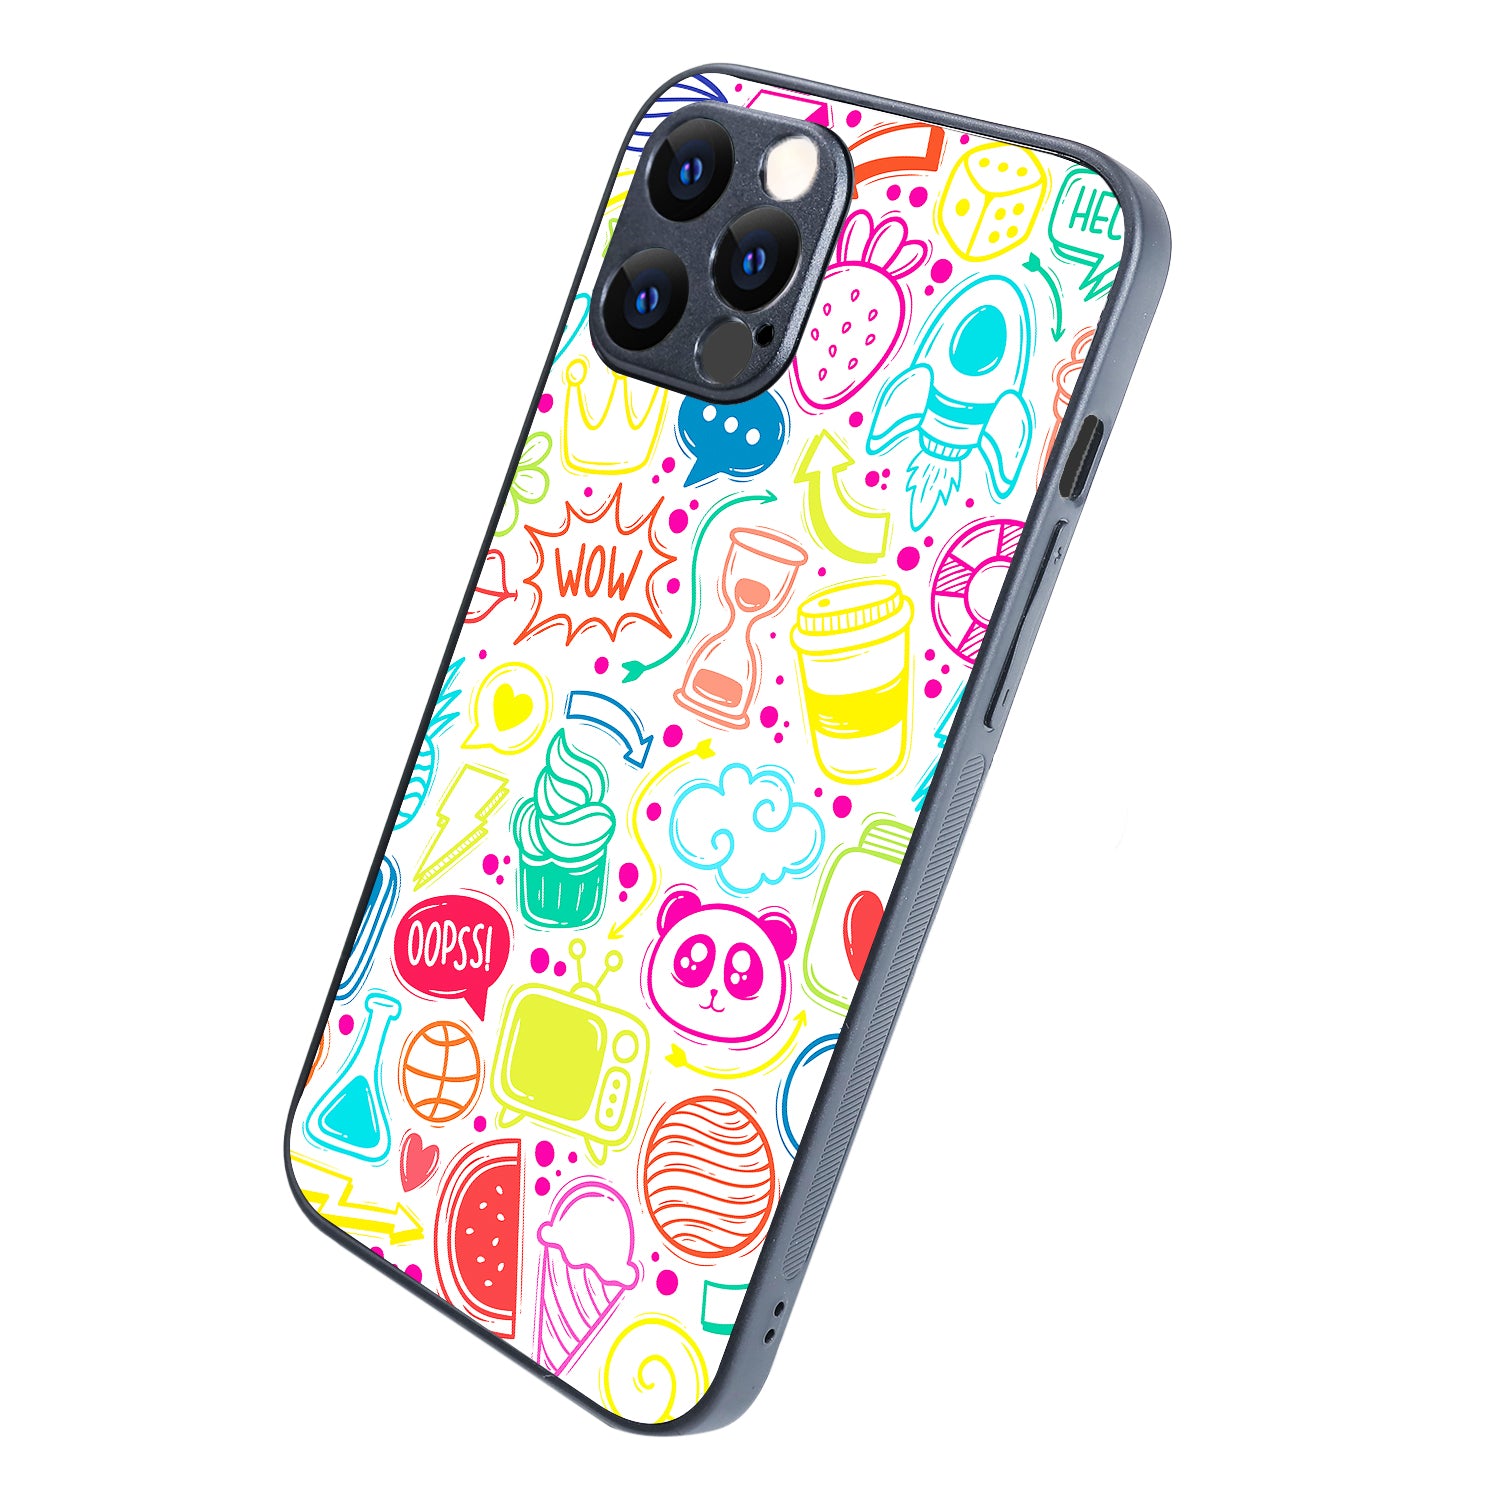 Wow Doodle iPhone 12 Pro Max Case